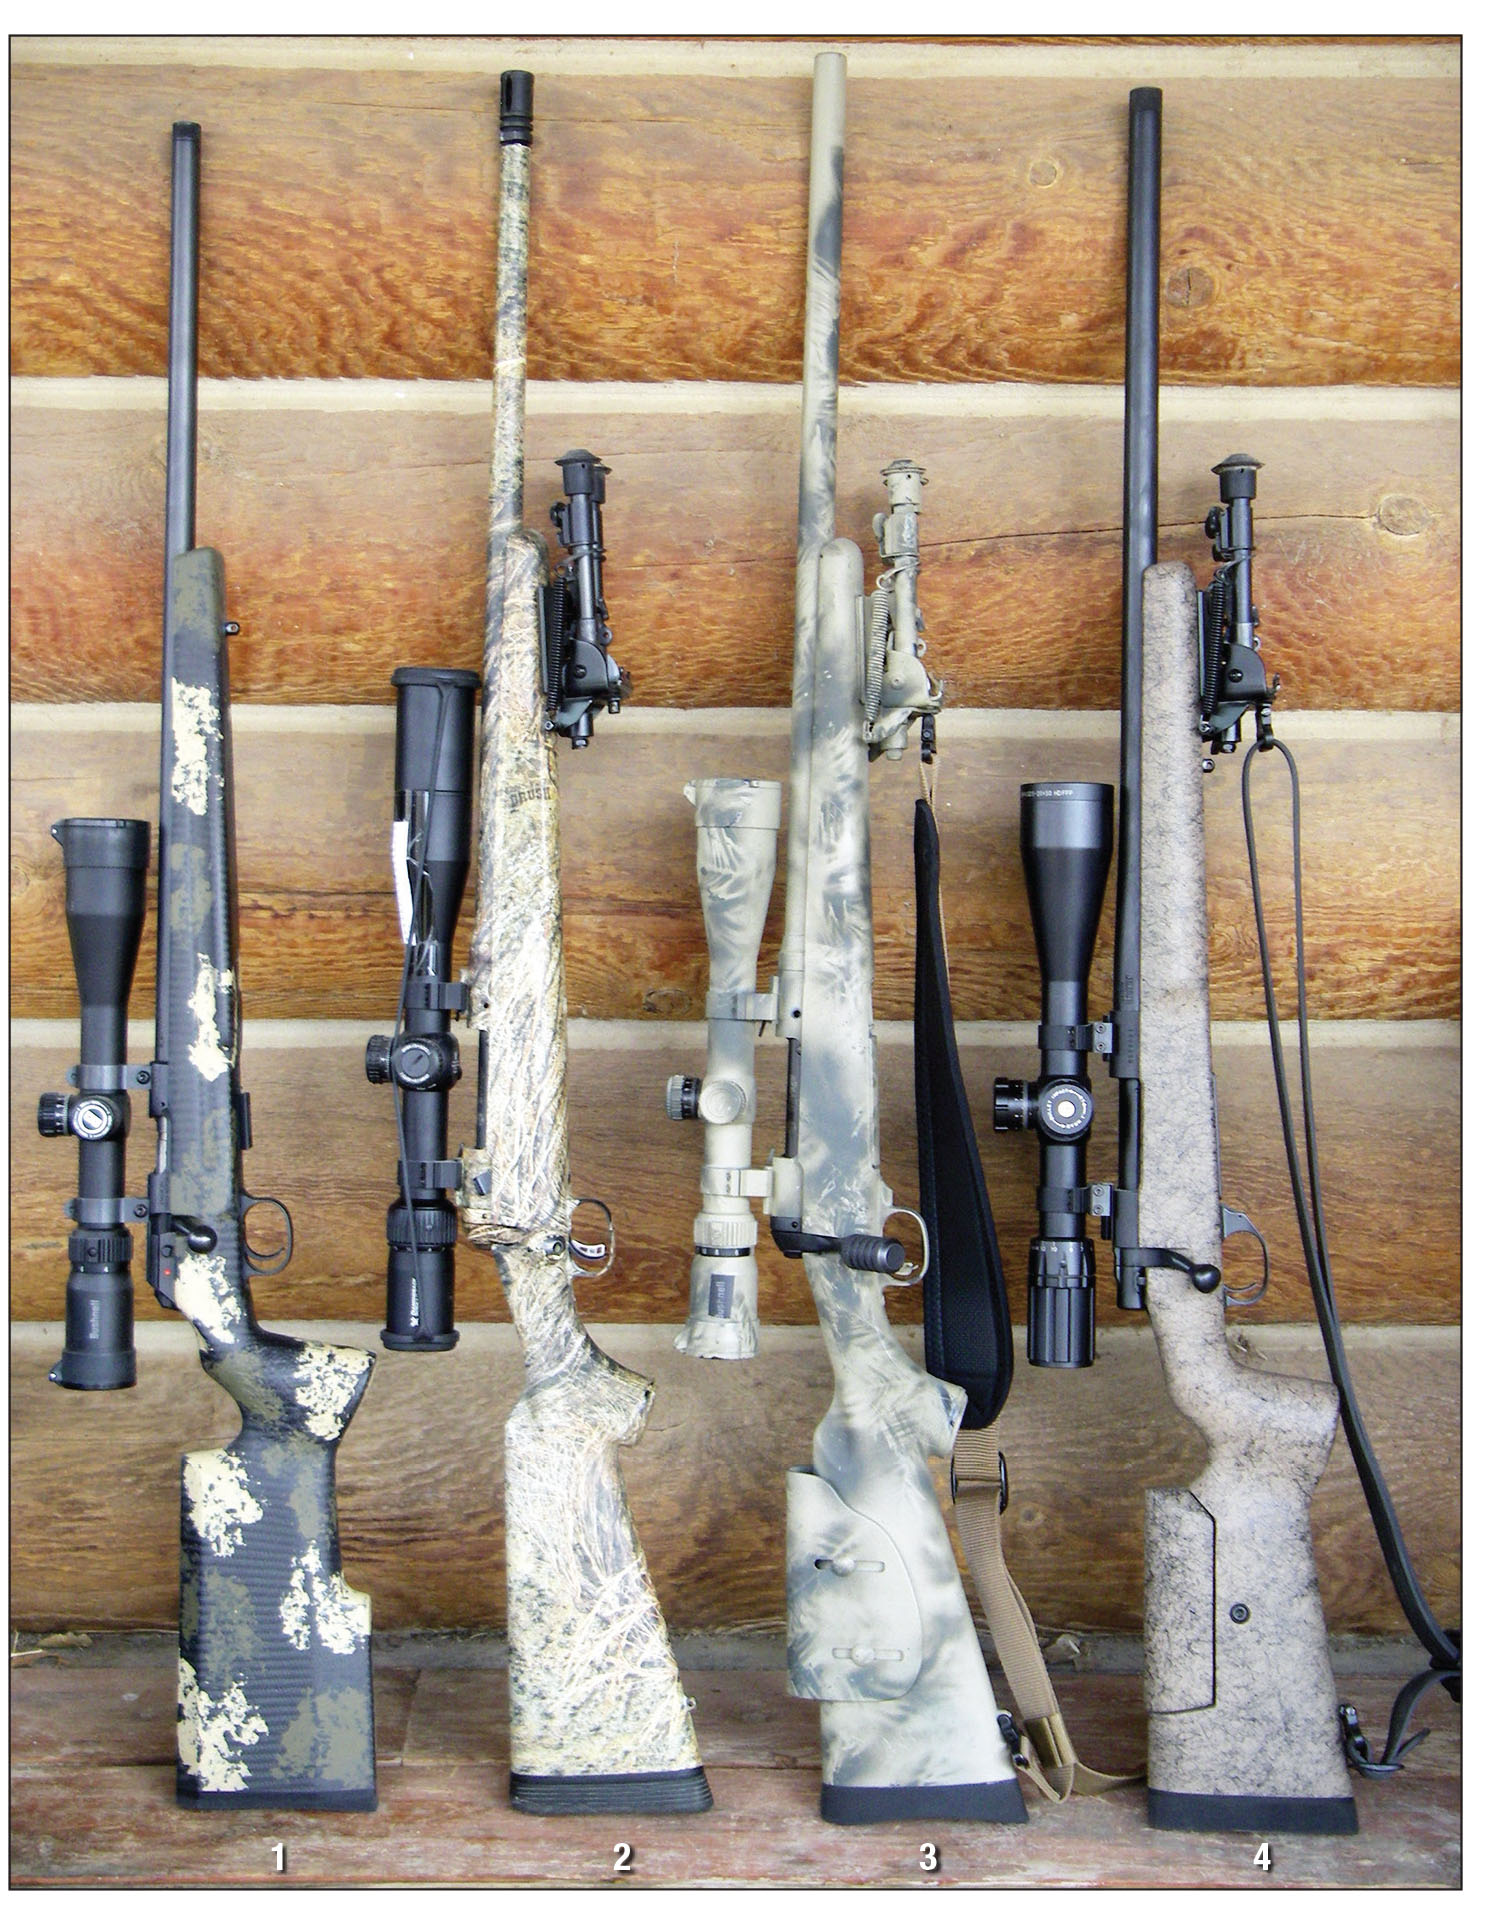 Most rifle manufacturers offer factory-built rifles specifically for long-range shooting. Examples include the (1) CZ 457 Varmint Precision Trainer .22 Long Rifle, (2) Savage Model 10 .22-250 Remington, (3) Savage Model 11 .243 Winchester and a (4) Howa Model 1500 .308 Winchester with heavy barrel and custom Bell & Carlson stock.